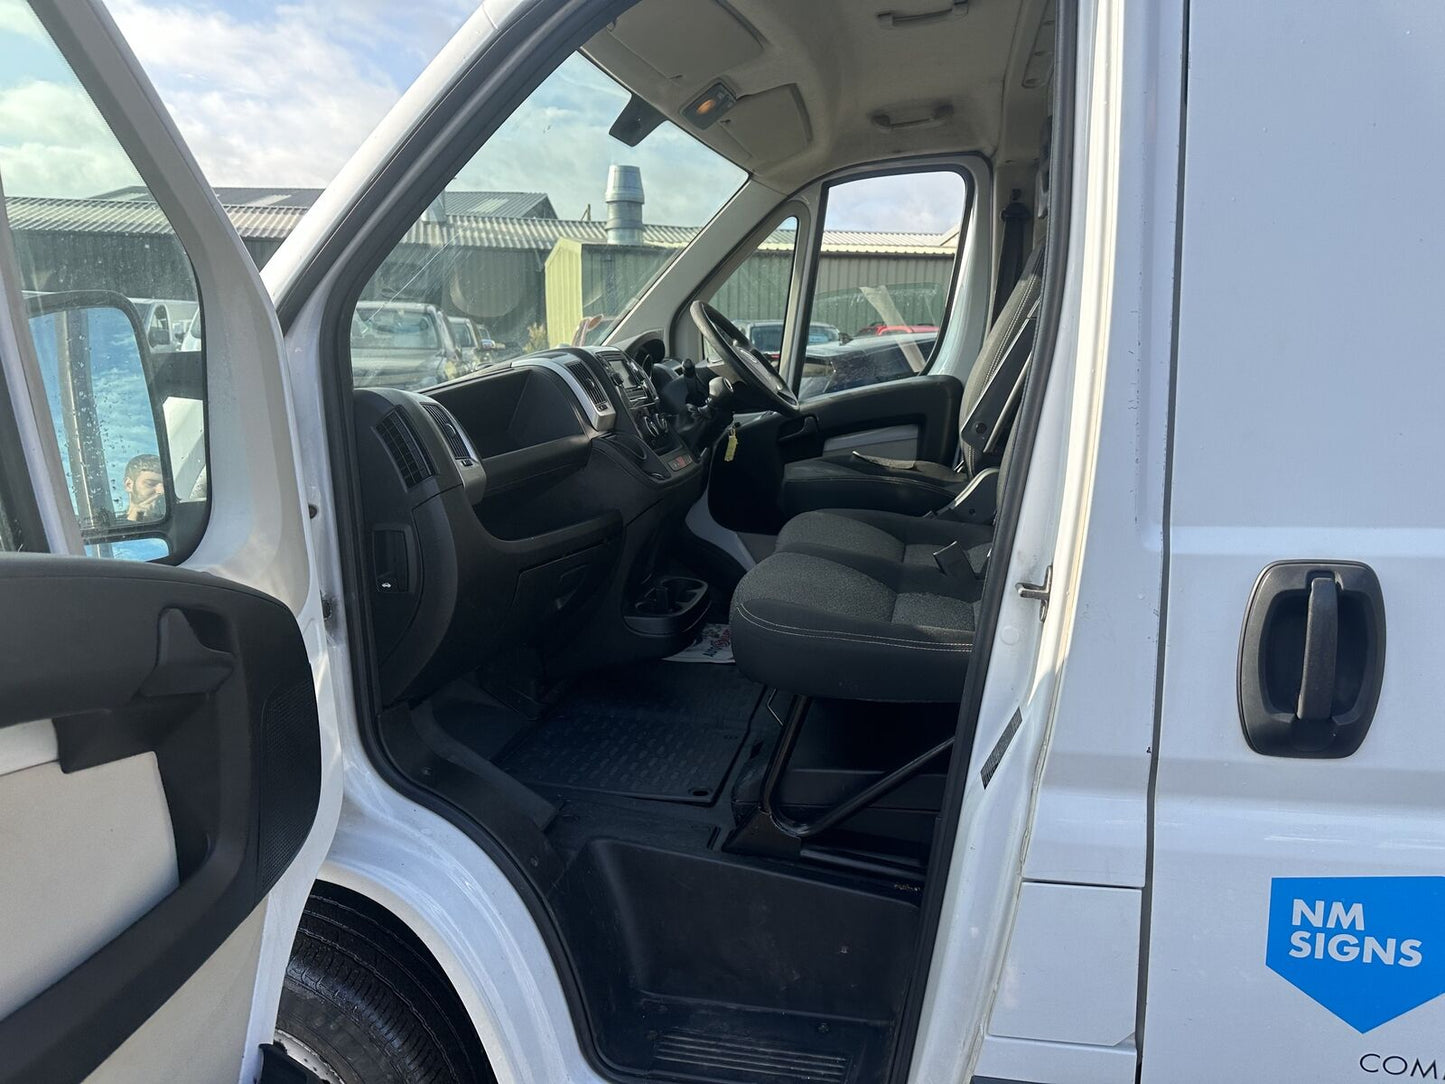 Bid on 2015 FIAT DUCATO 35 2.3 MULTIJET MWB- Buy &amp; Sell on Auction with EAMA Group